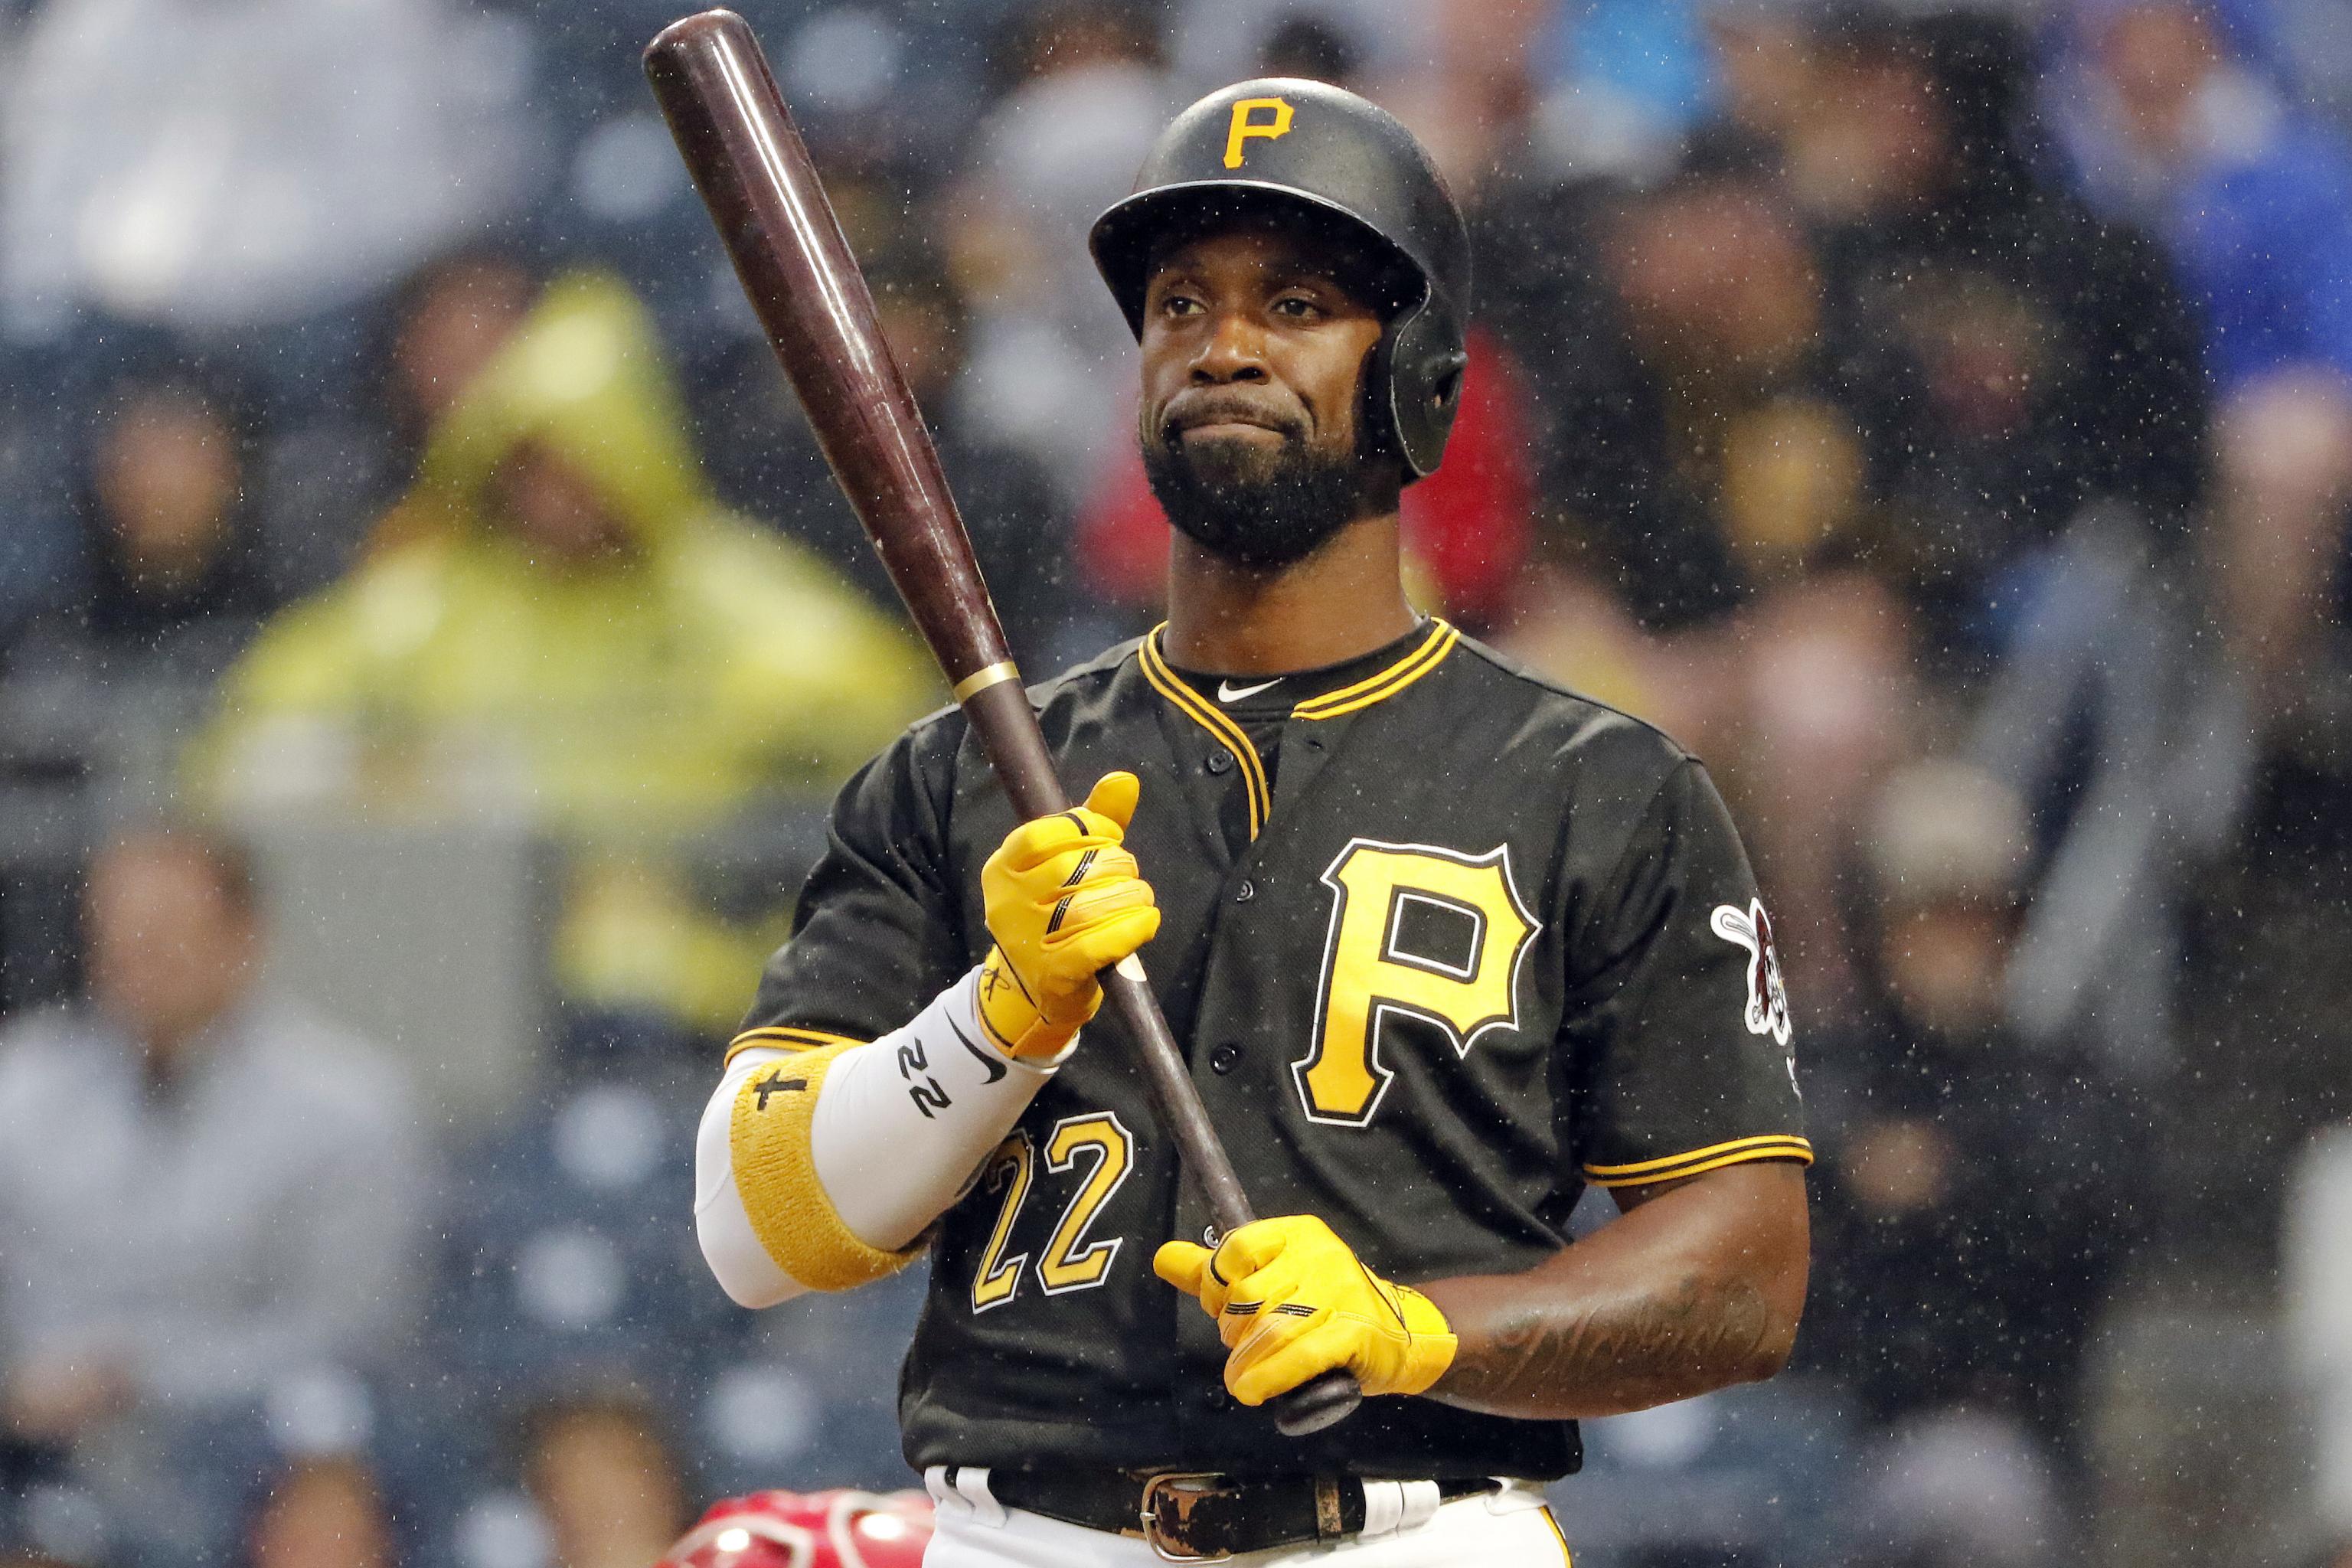 Pittsburgh Pirates: Three MVPs You May Have Forgotten